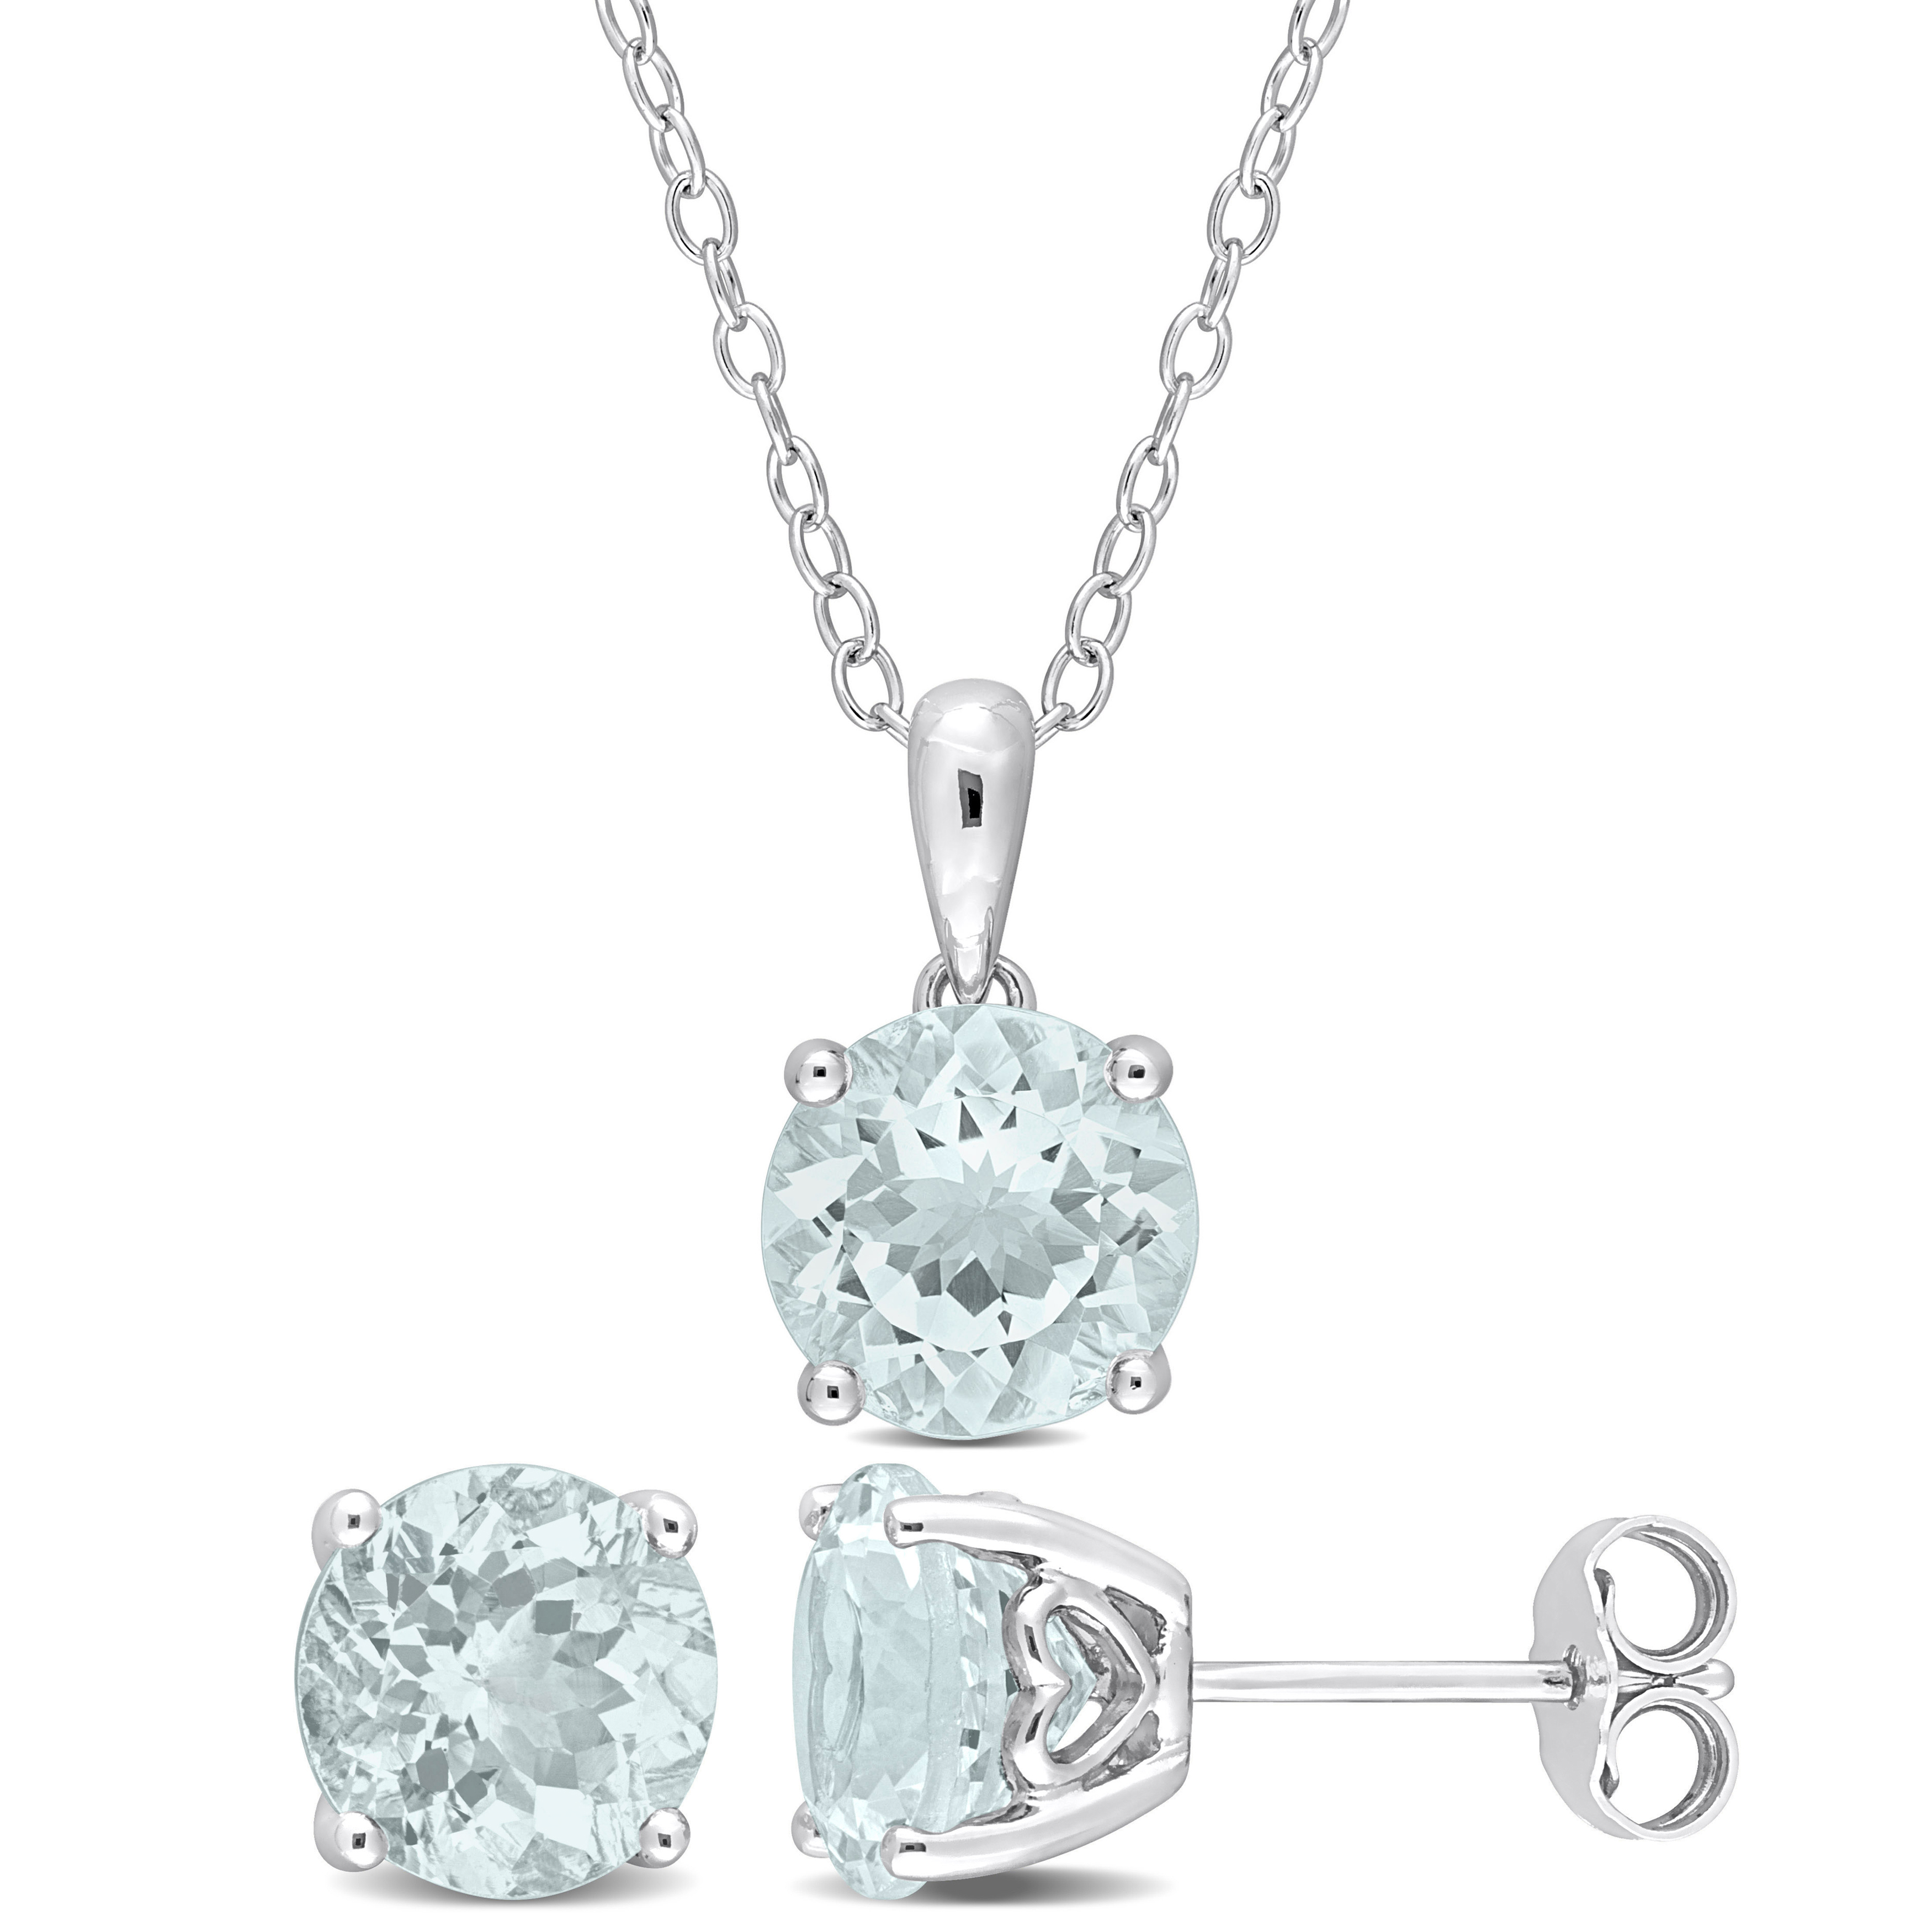 4 7/8 CT TGW Aquamarine 2-Piece Set of Pendant with Chain and Earrings in Sterling Silver